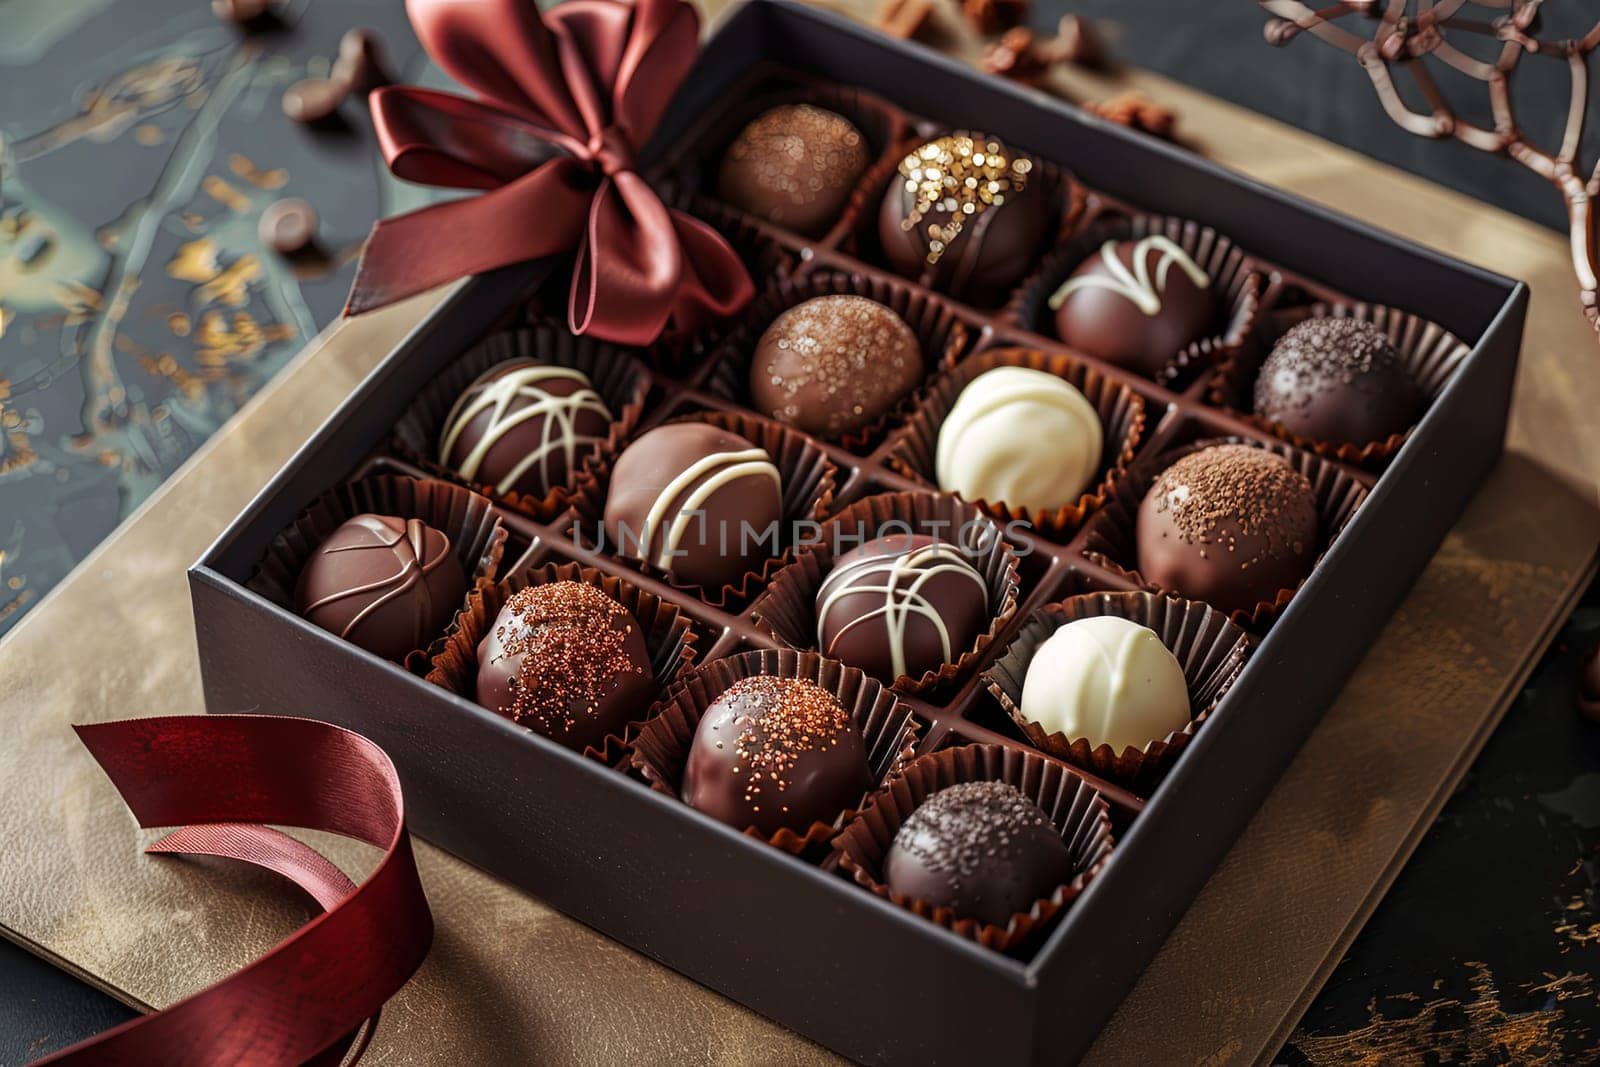 Elegant box of chocolate truffles adorned with a vibrant red ribbon, showcasing a luxurious presentation with rich dark colors.